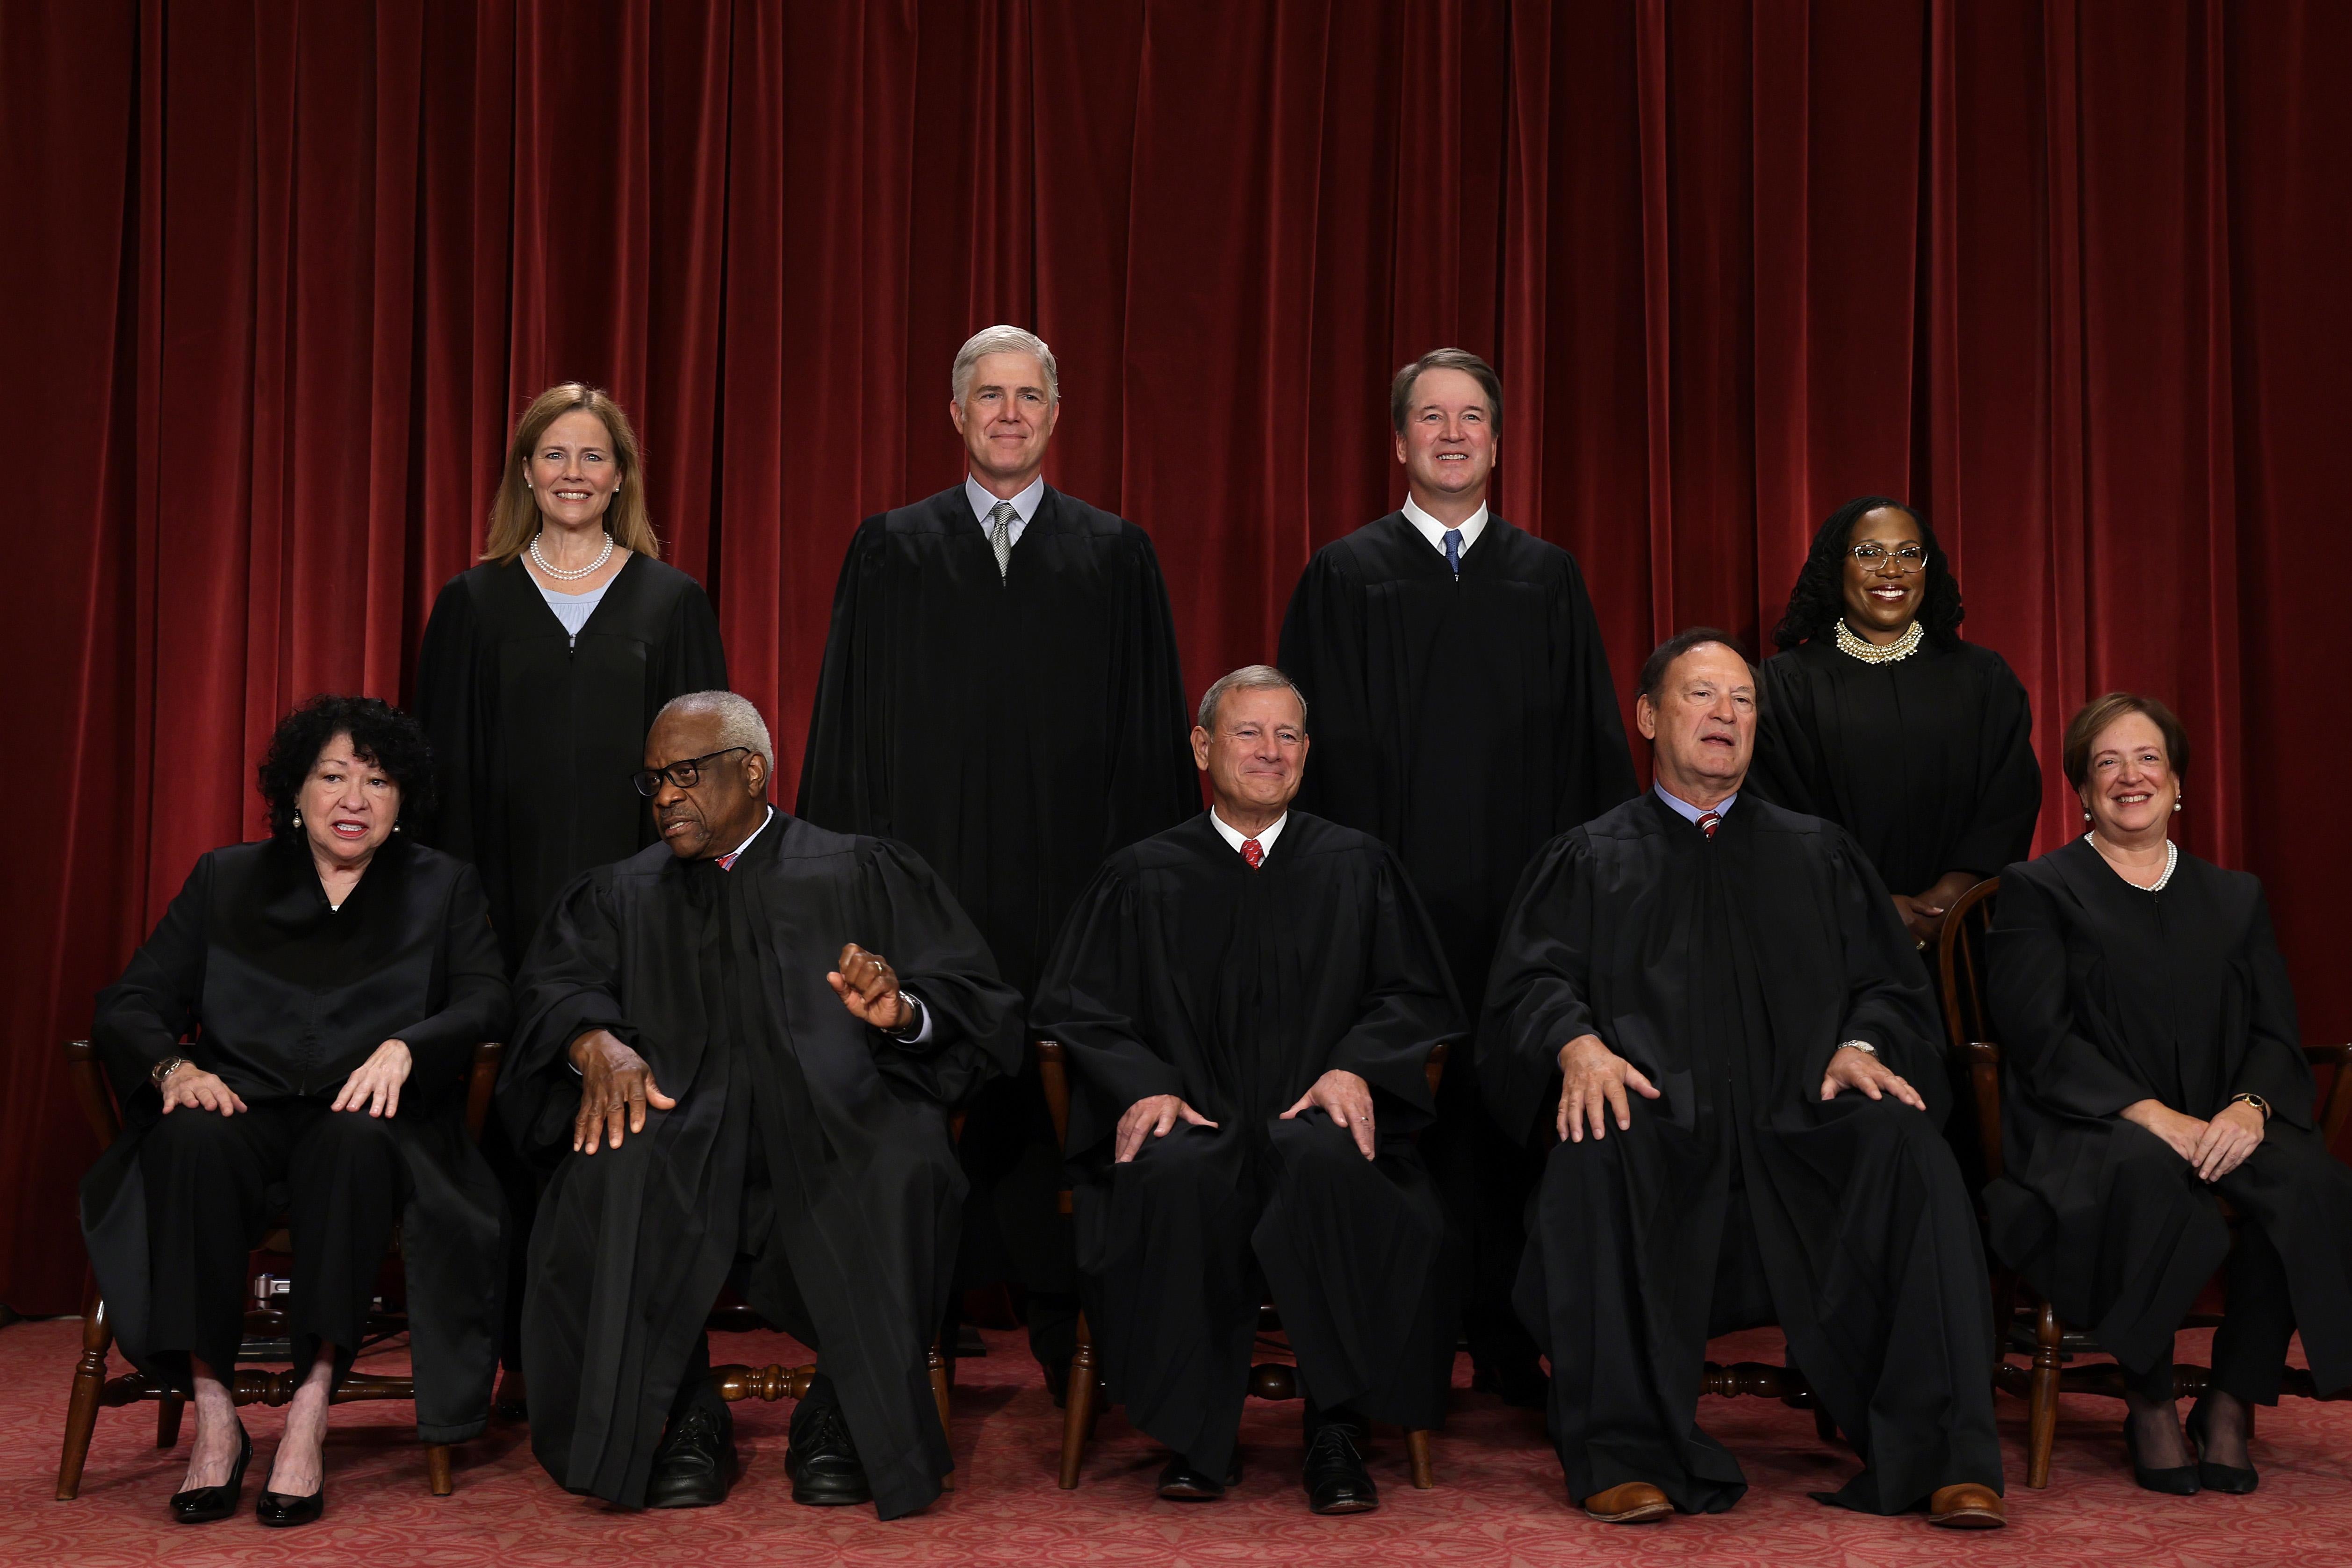 The nine justices of the U.S. Supreme Court.